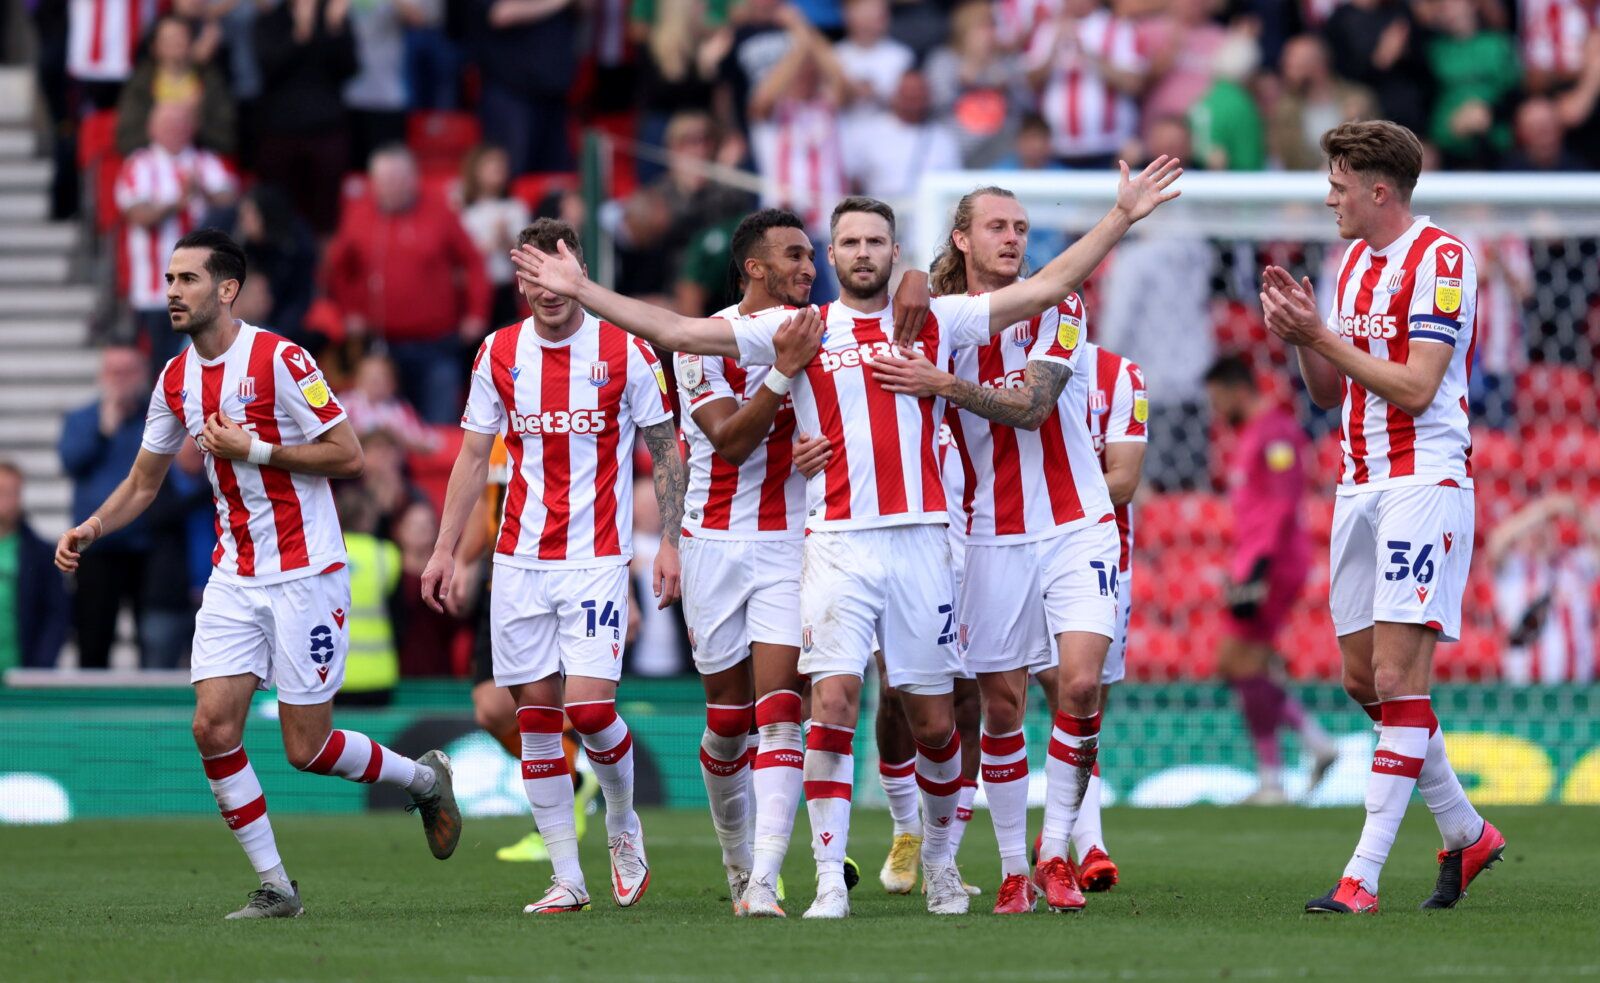 Soccer Football - England - Championship - Stoke City v Hull City - bet365 Stadium, Stoke-on-Trent, Britain - September 25, 2021  Stoke City's Nick Powell celebrates scoring their second goal with teammates  Action Images/John Clifton   EDITORIAL USE ONLY. No use with unauthorized audio, video, data, fixture lists, club/league logos or 